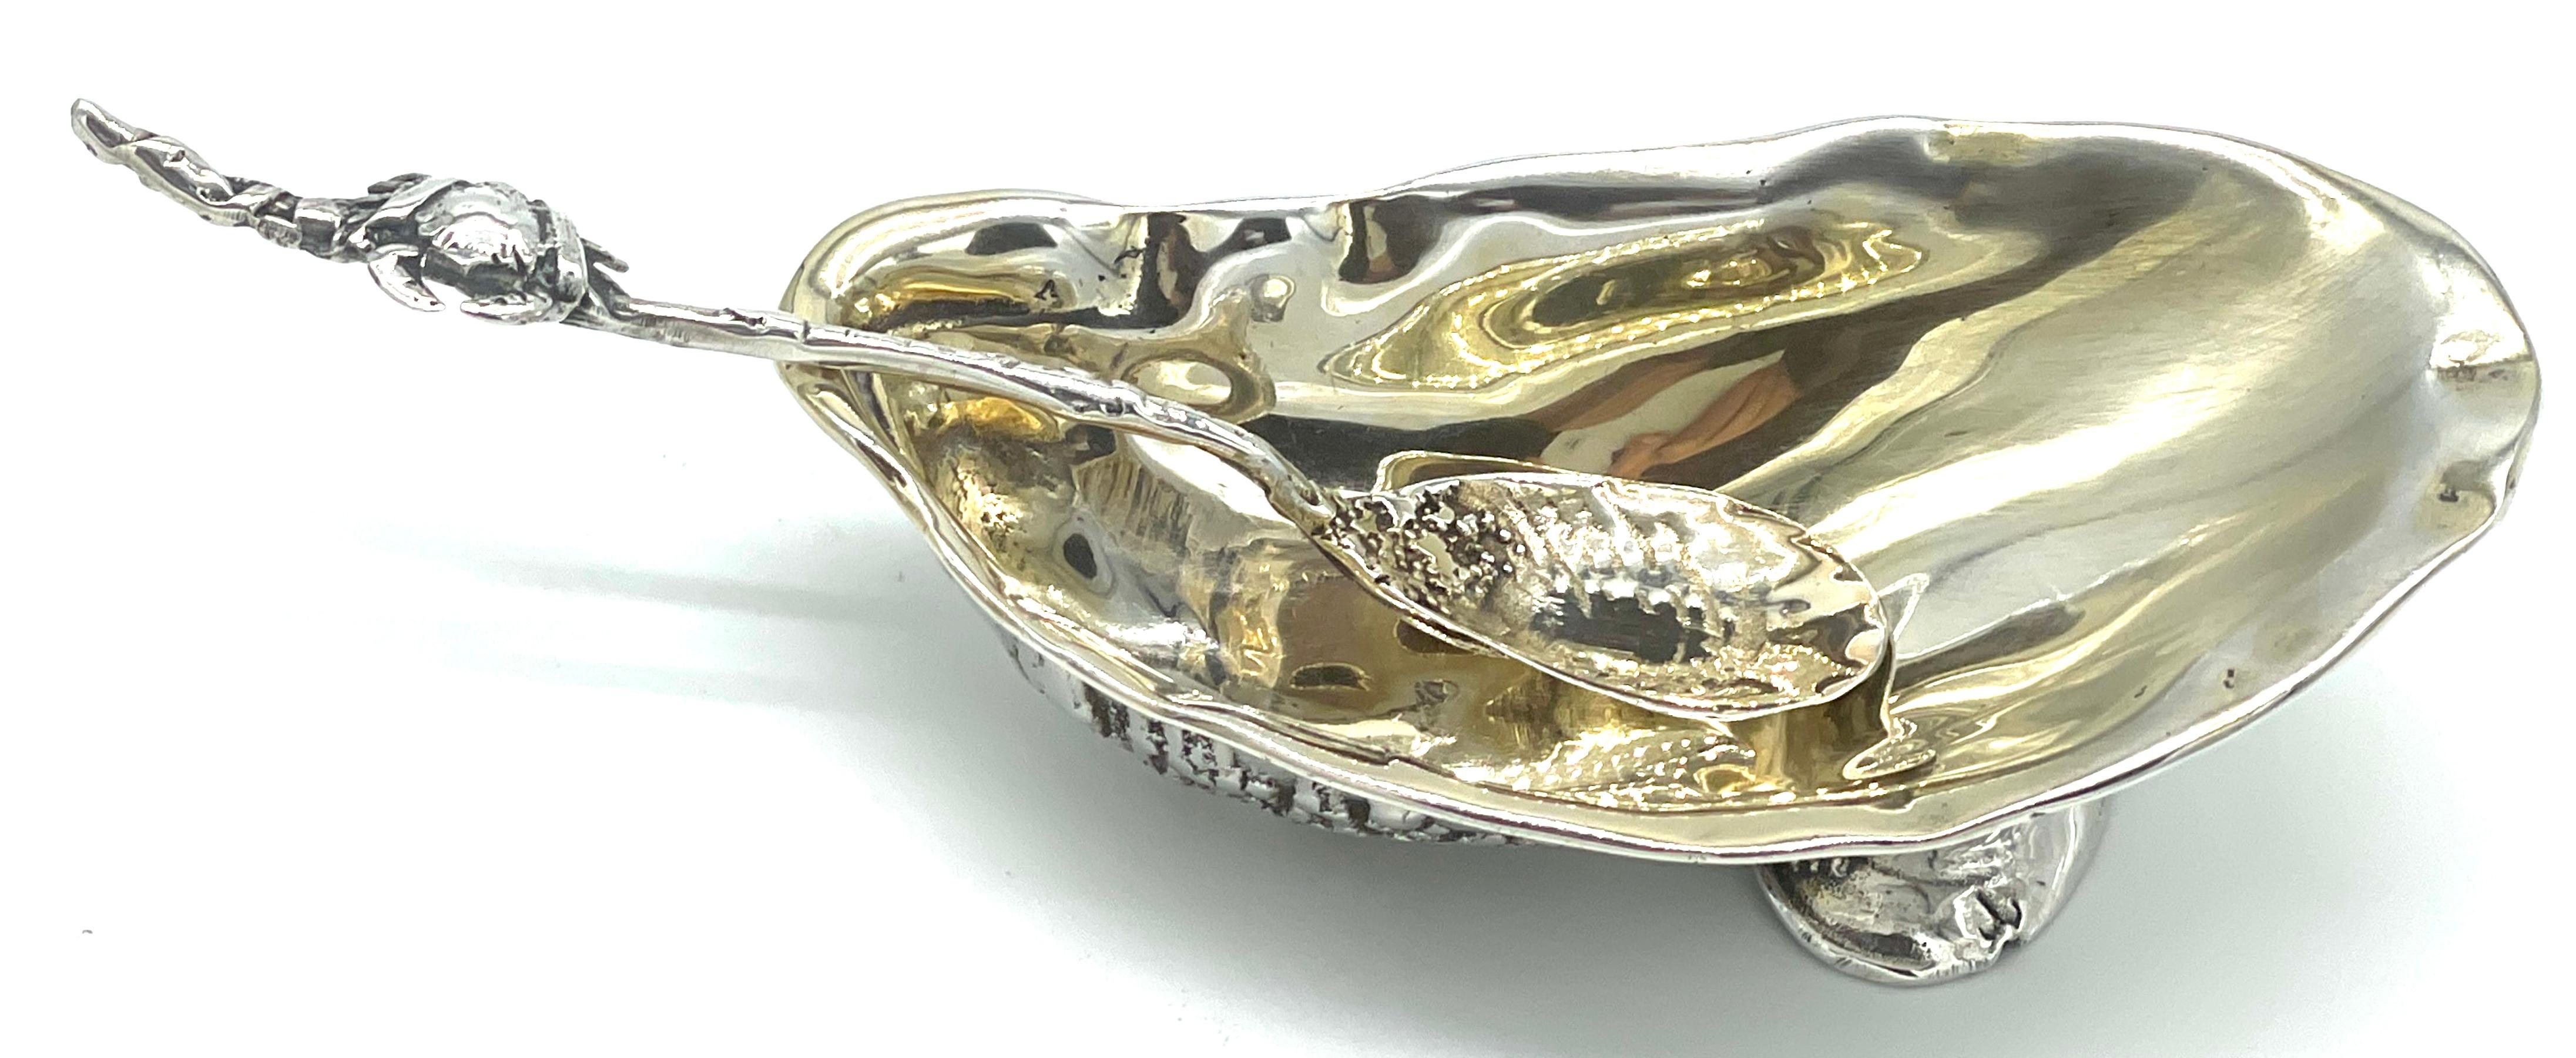 Gorham  'Narragansett' Gold Washed Sterling Shell Dish & Figural Crab Spoon 
USA, circa 1890s 
A rare find, two piece set in one of scarcest patterns of the Gorham Mfg. Co. 'Narragansett', a sculptural Shell Dish & Figural Crab Spoon, this offering